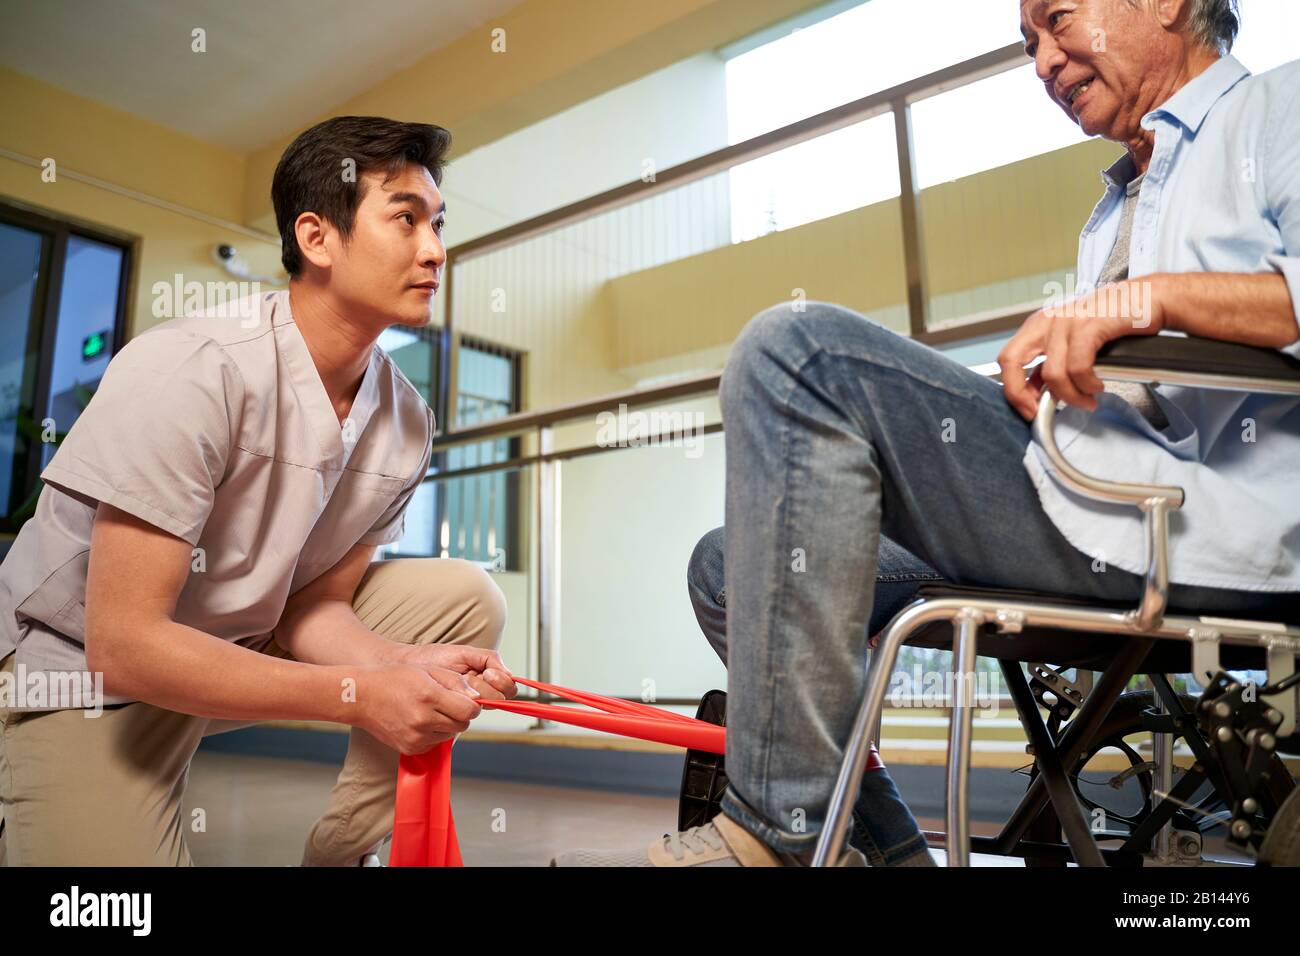 young asian physical therapist working with senior man on enhancing leg strength using resistance band Stock Photo